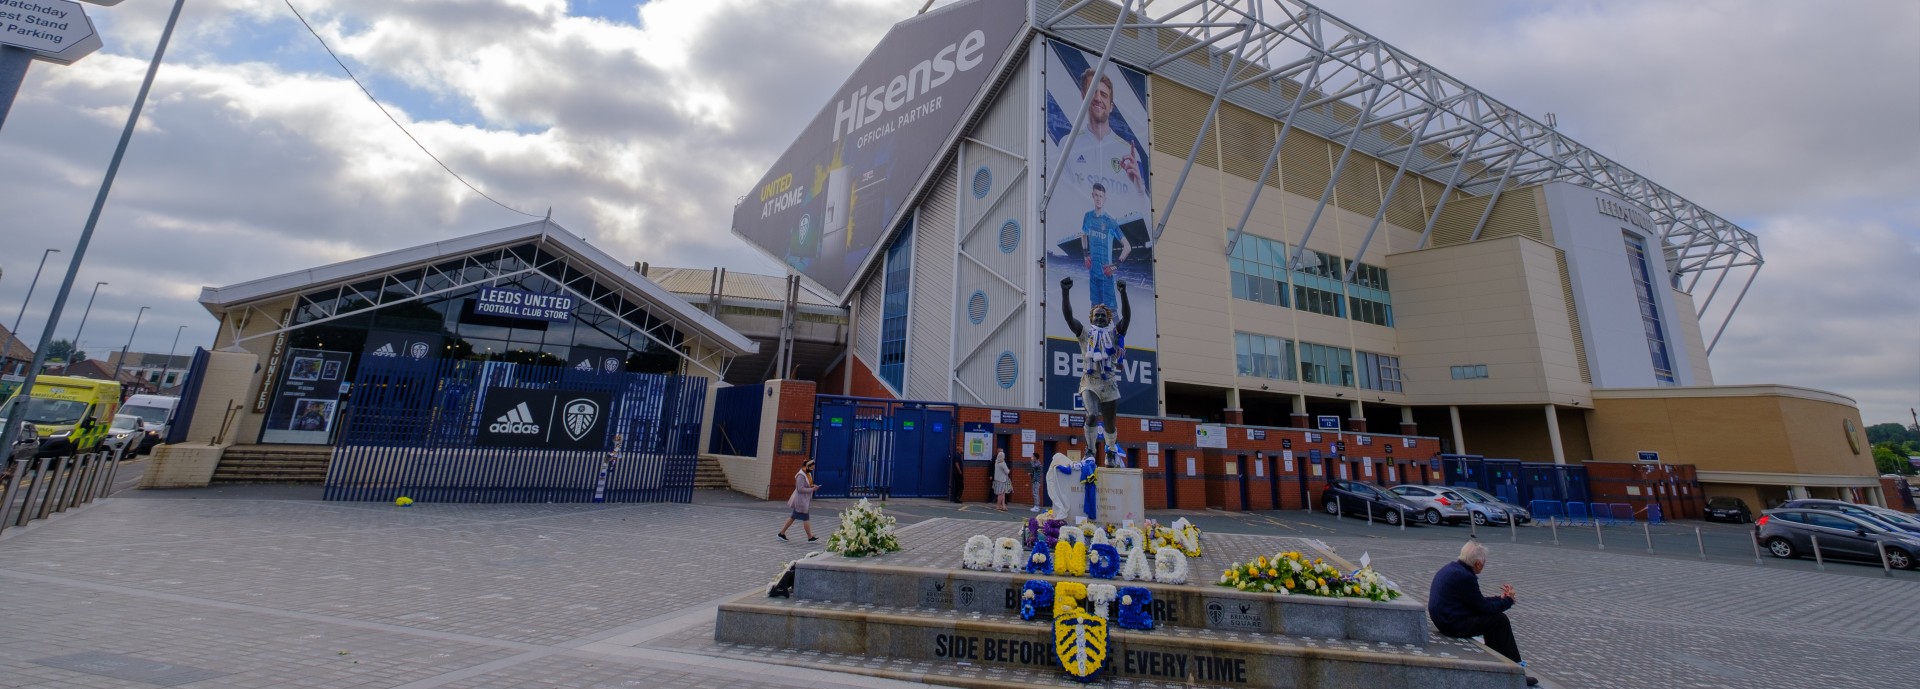 Exterior view of Elland Road football stadium with the Billy Bremner statue in the foreground in Leeds, England